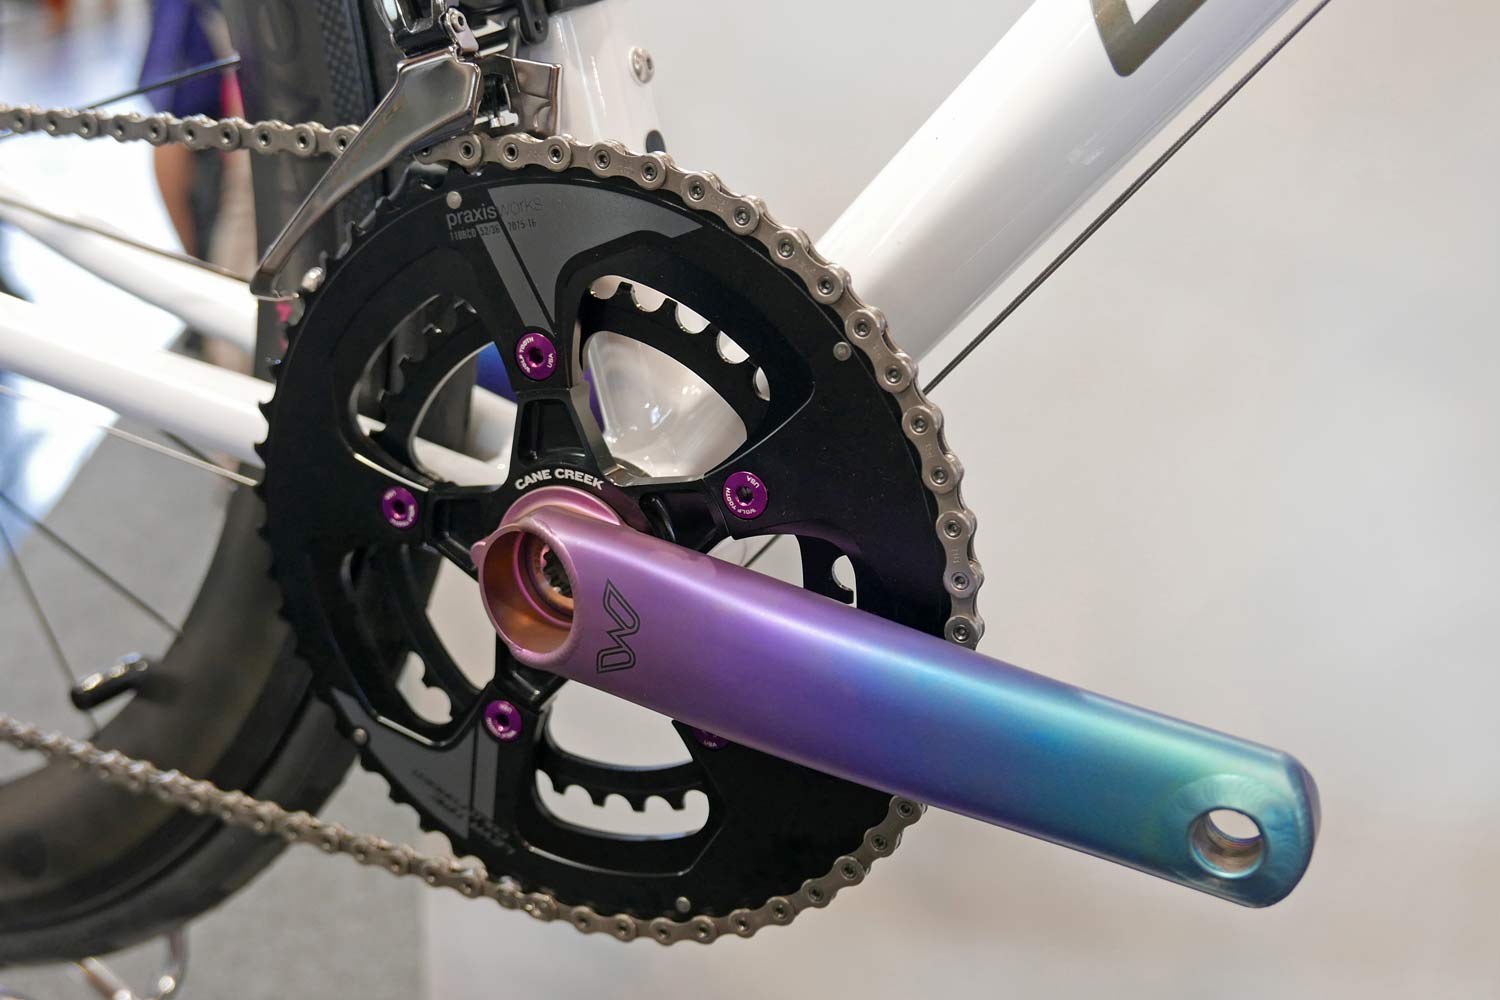 Cane Creek All Road eeWings join the titanium tie-dye party with limited edition cranks